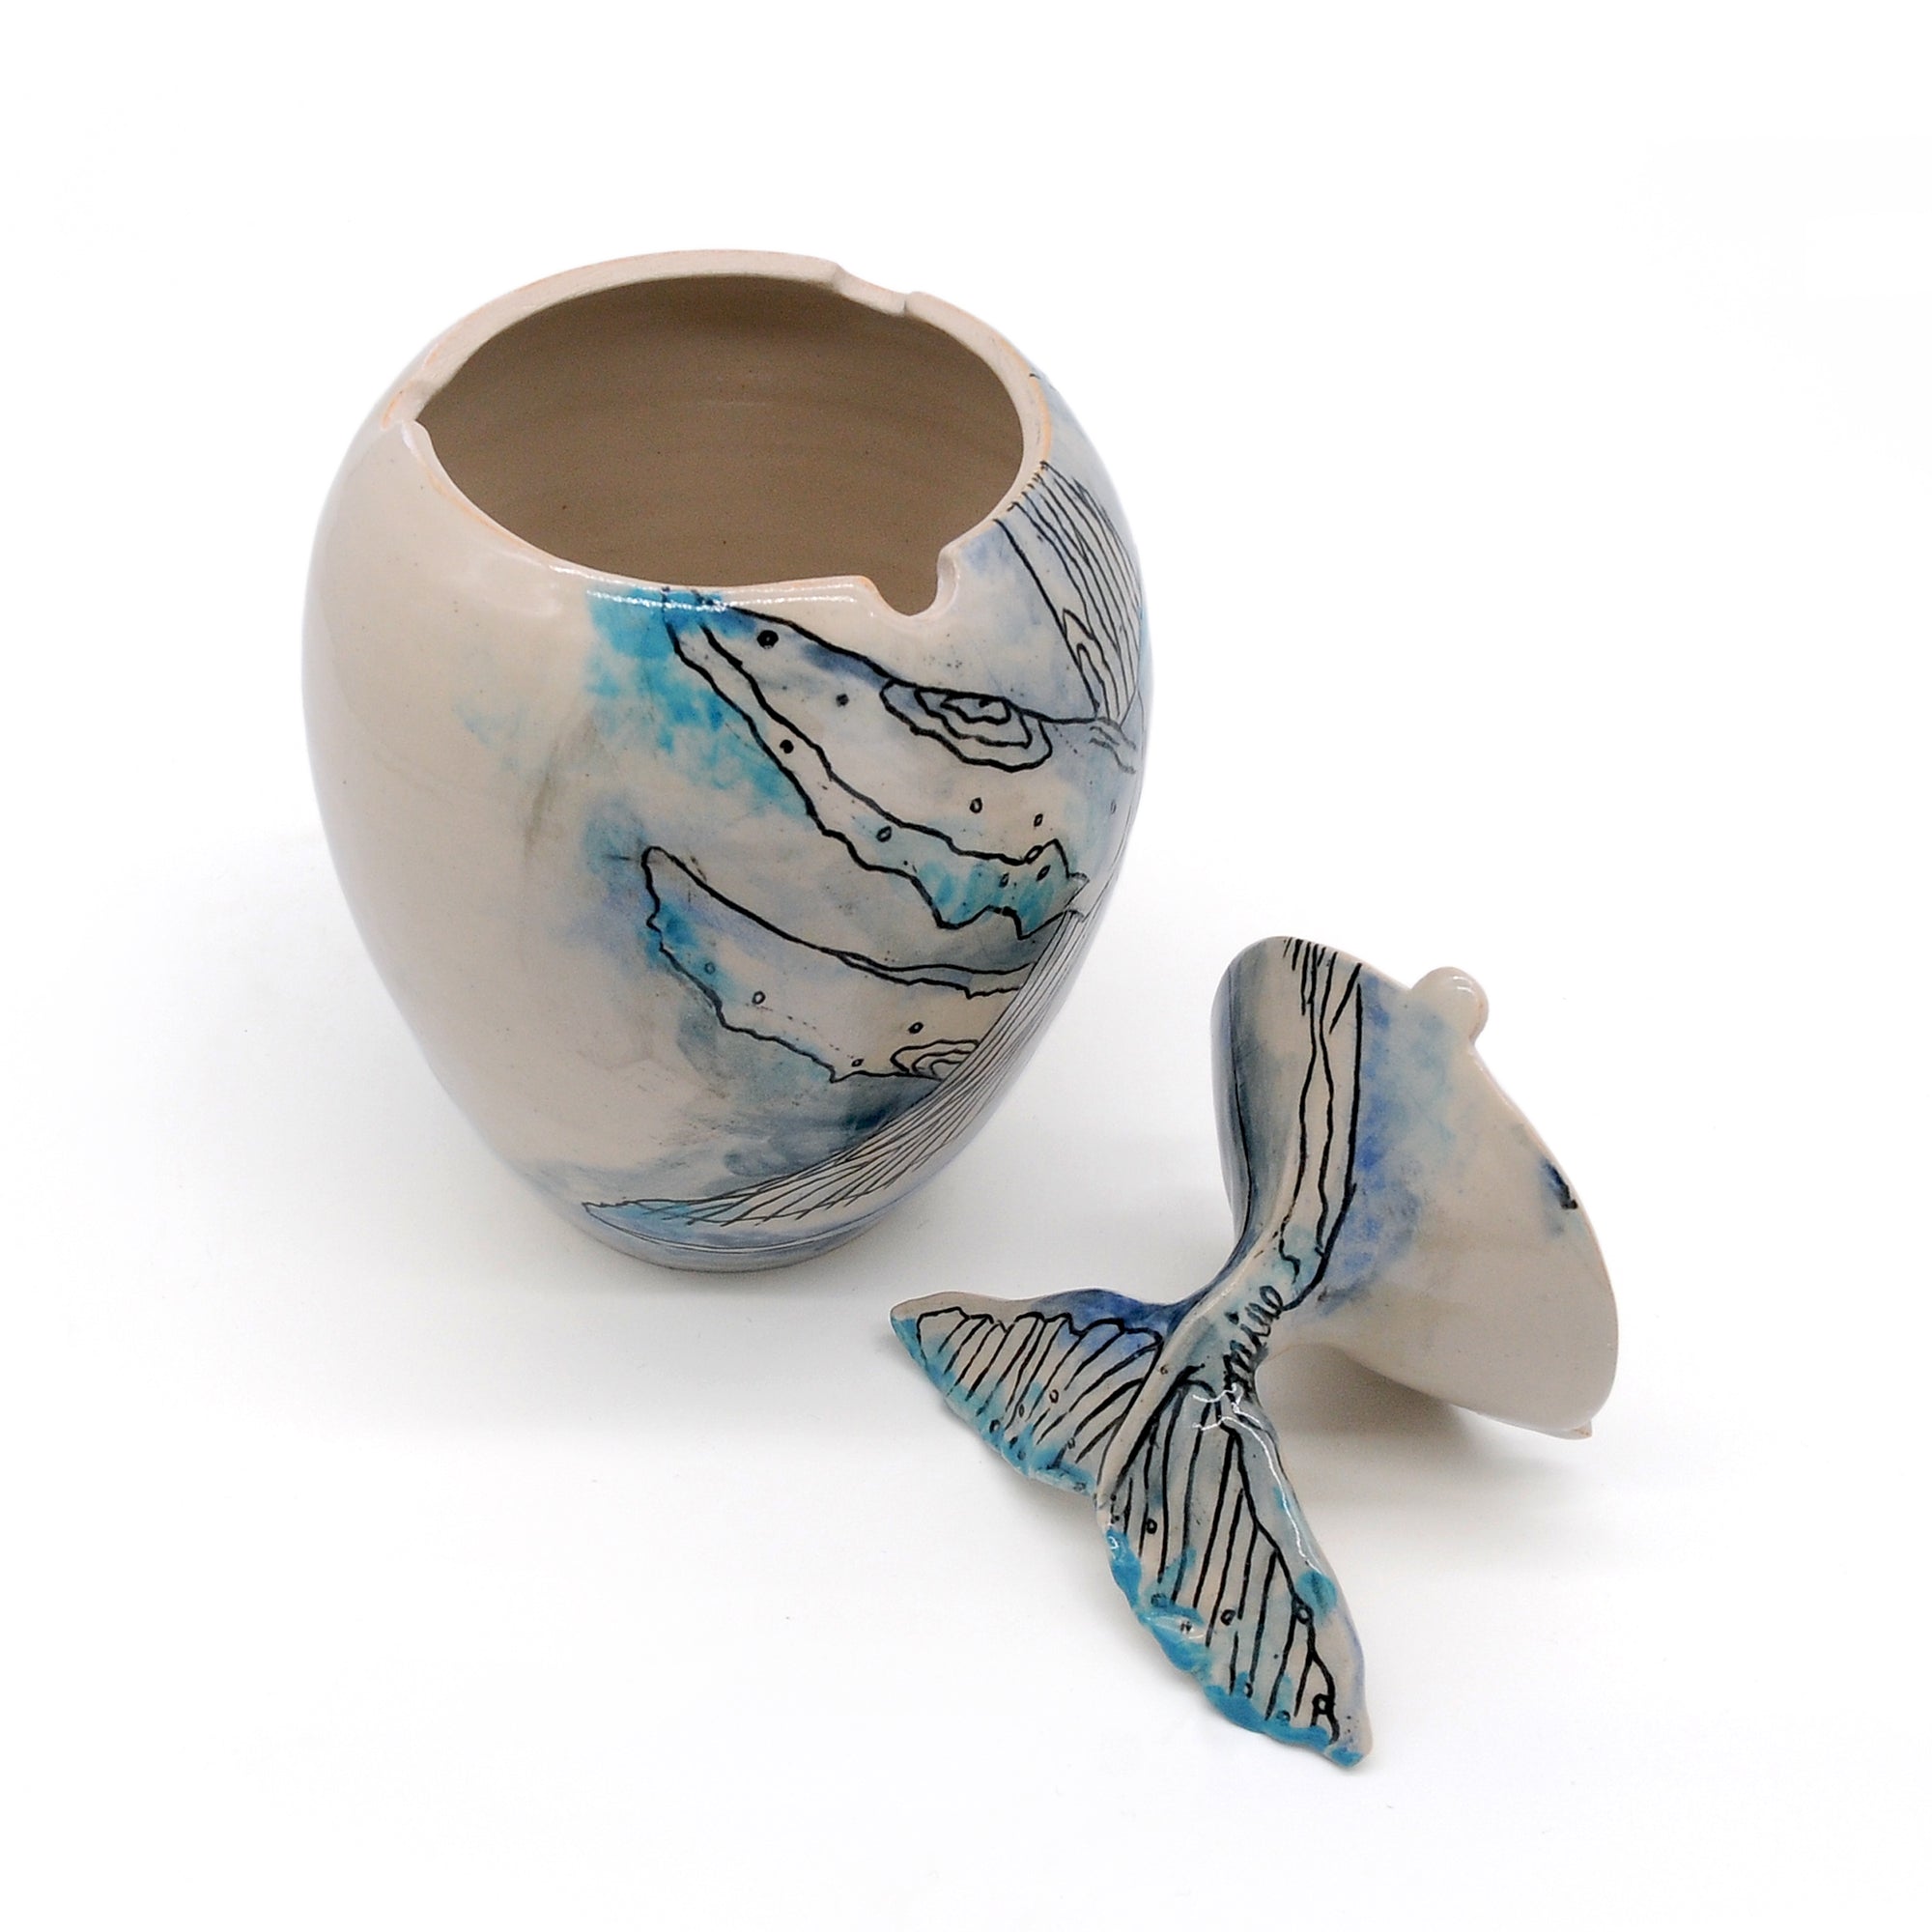 'MK20 Whale’ by Miae Kim ceramics, available at Padstow Gallery, Cornwall